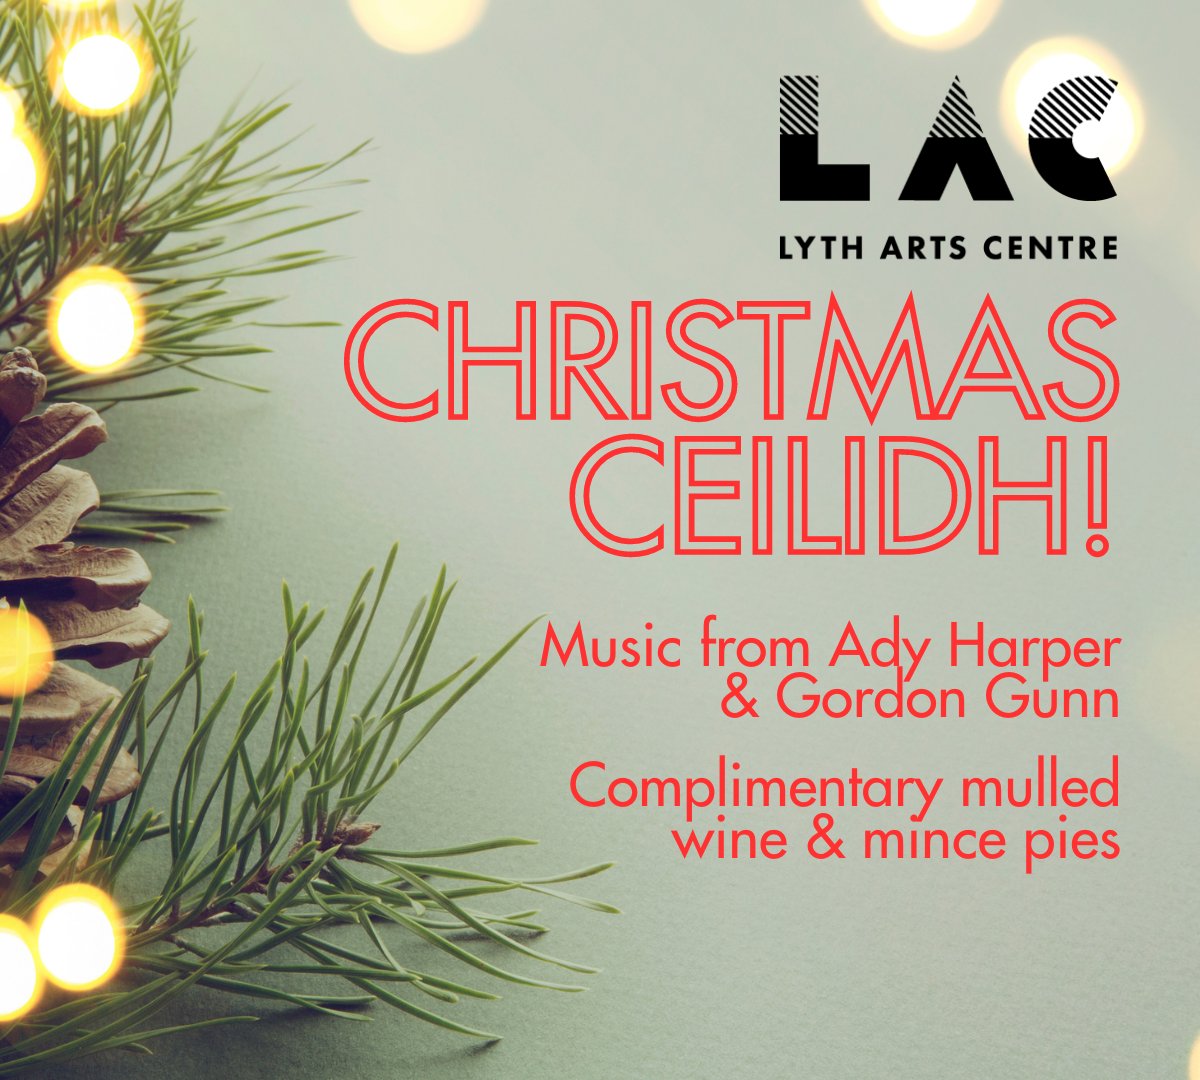 Join us for our annual Christmas Ceilidh! ⛄ Saturday 9 December (8pm-11pm) ⛄ Music from Ady Harper and his band ⛄ Complimentary mulled wine and mince pies ⛄ EVERYONE WELCOME! TICKETS: lytharts.org.uk/event/lac-chri…